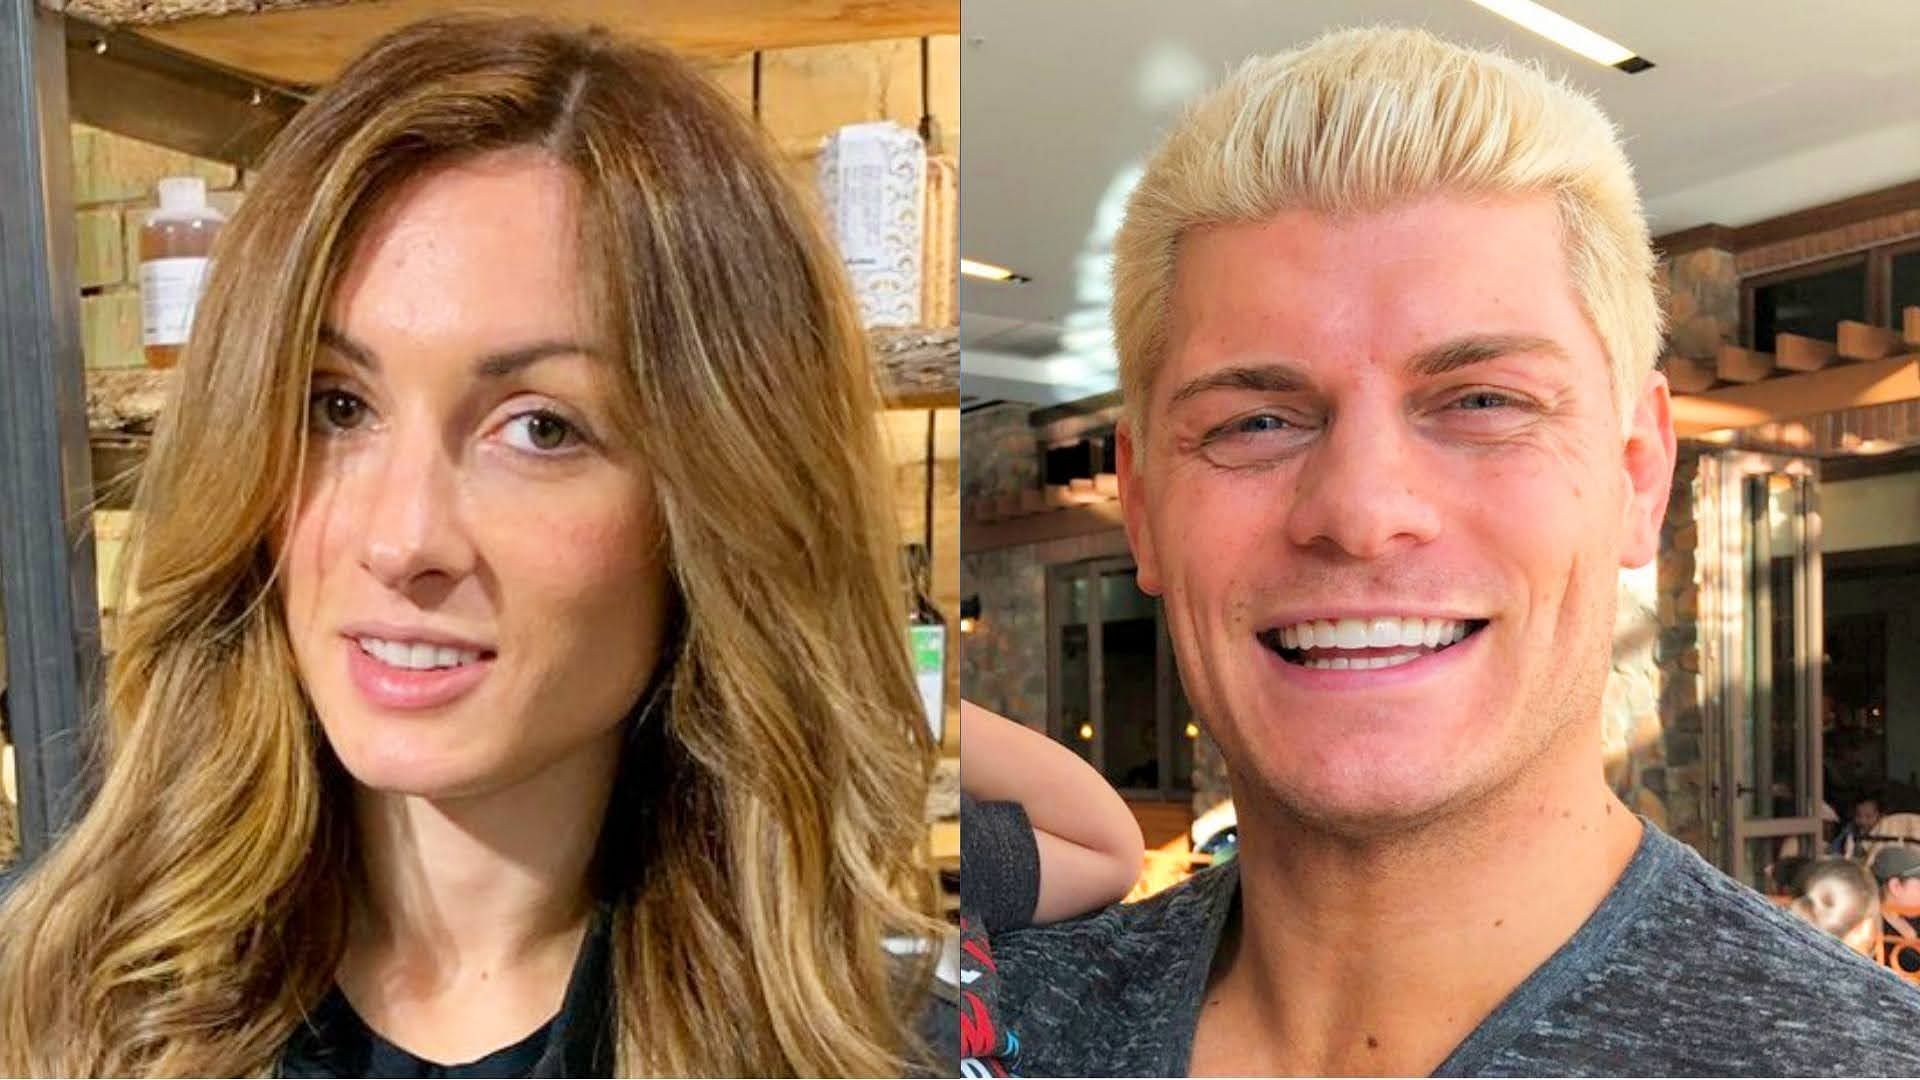 Becky Lynch (left) and Cody Rhodes (right) have seen great success in WWE